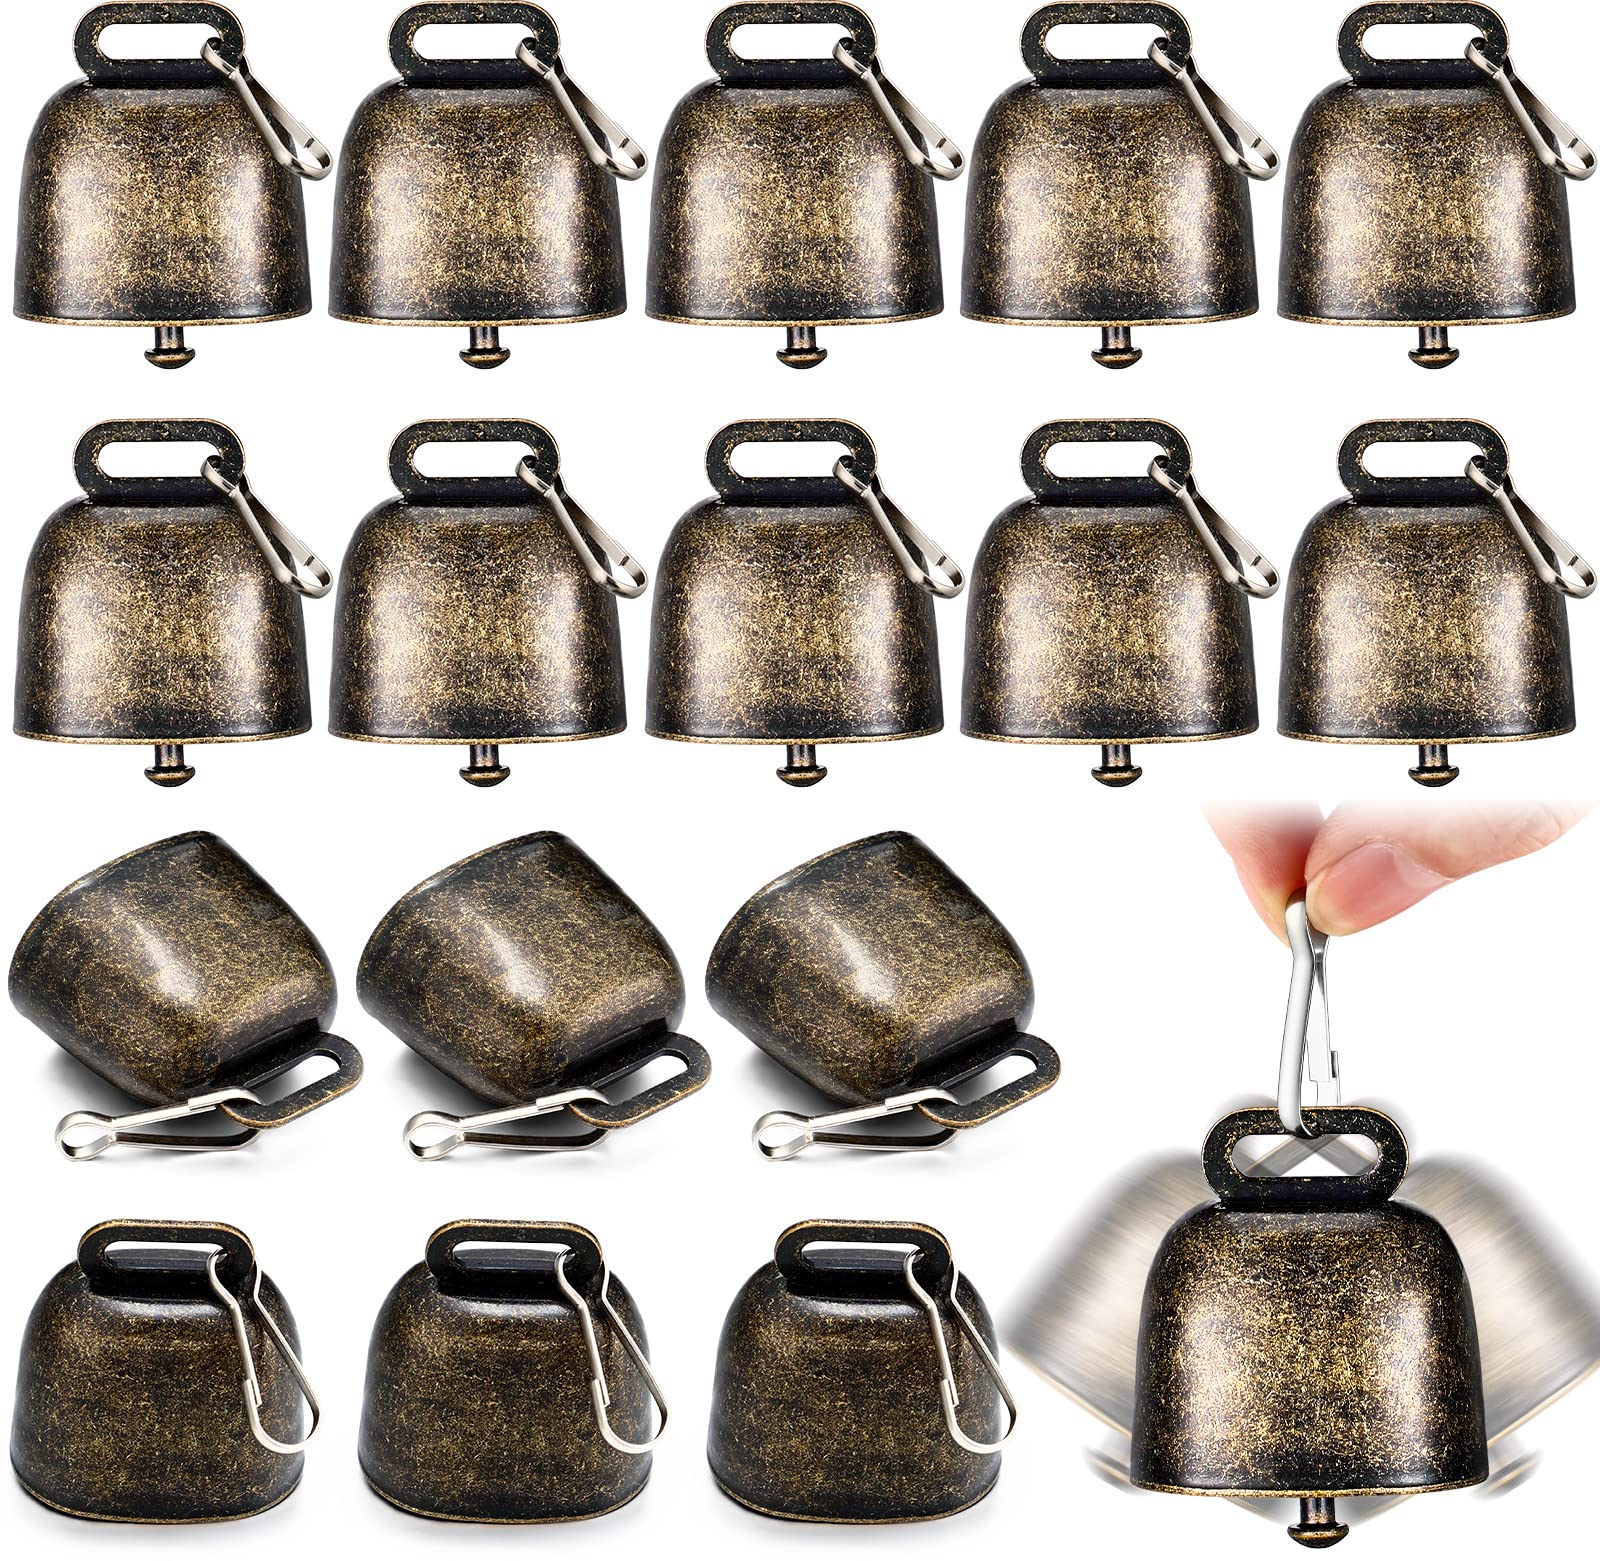 6 Piece Cow Bell, Sheep Cow Bells Pasture Bells, Copper Bells Cattle Bronze  Bell, For Anti-theft Goat Animal Farm Accessories-mxbc